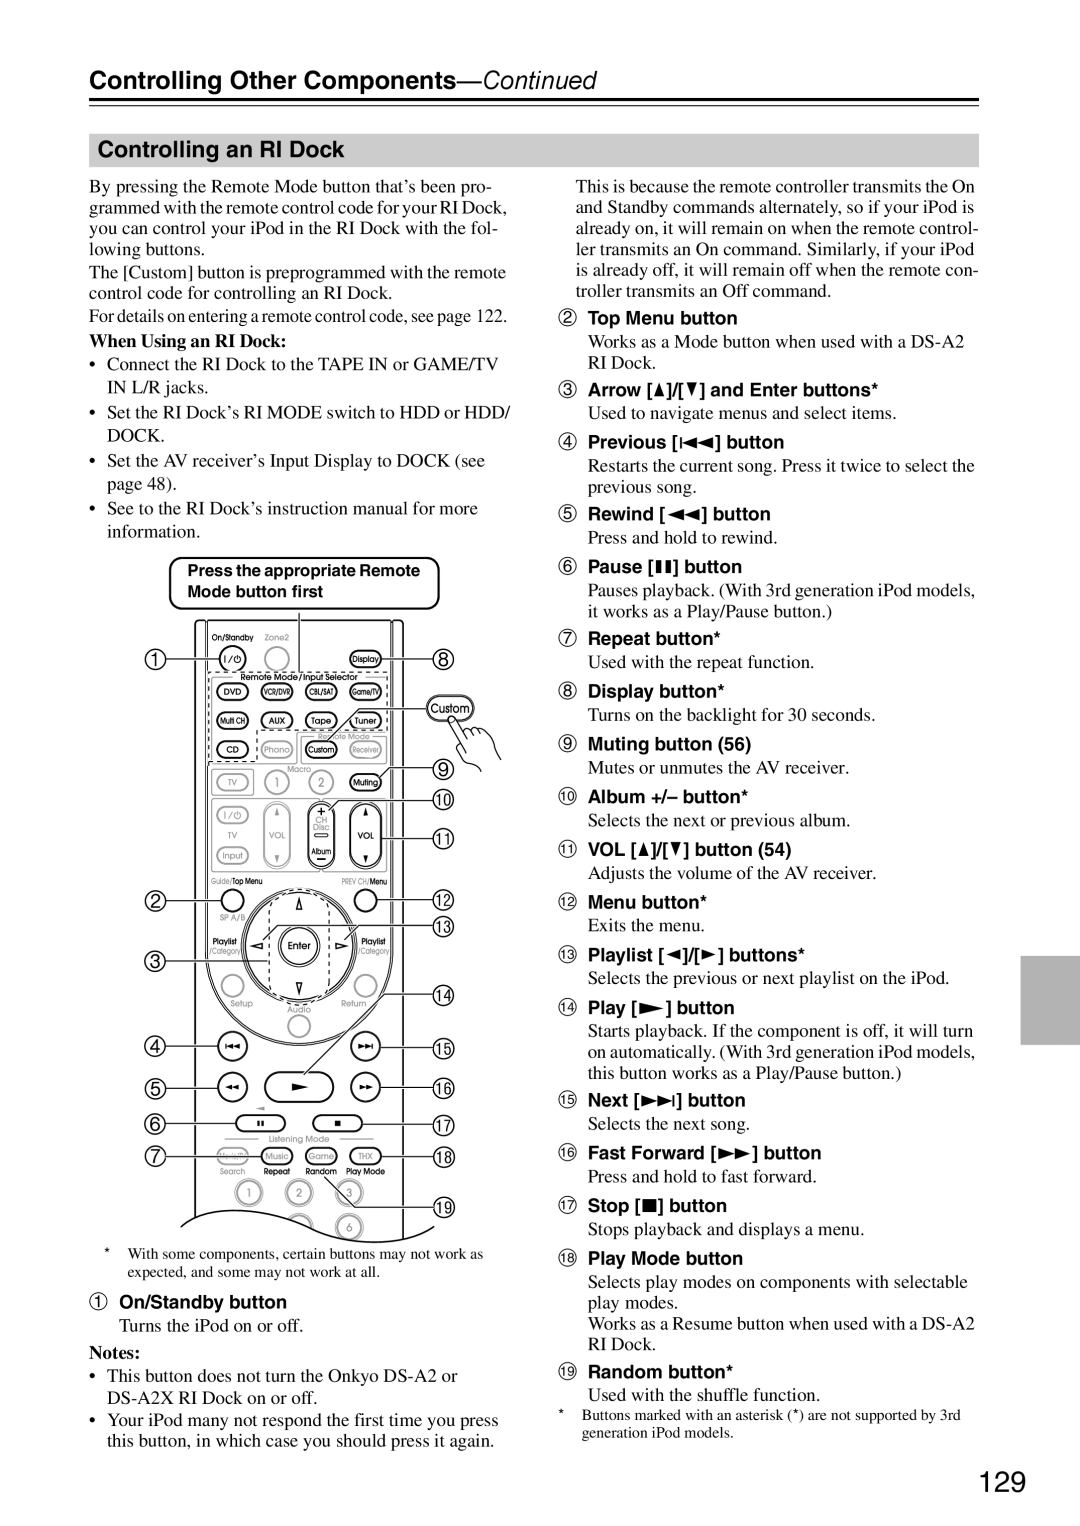 Onkyo DTR-7.9 instruction manual Controlling an RI Dock, When Using an RI Dock, Used with the repeat function, Notes 